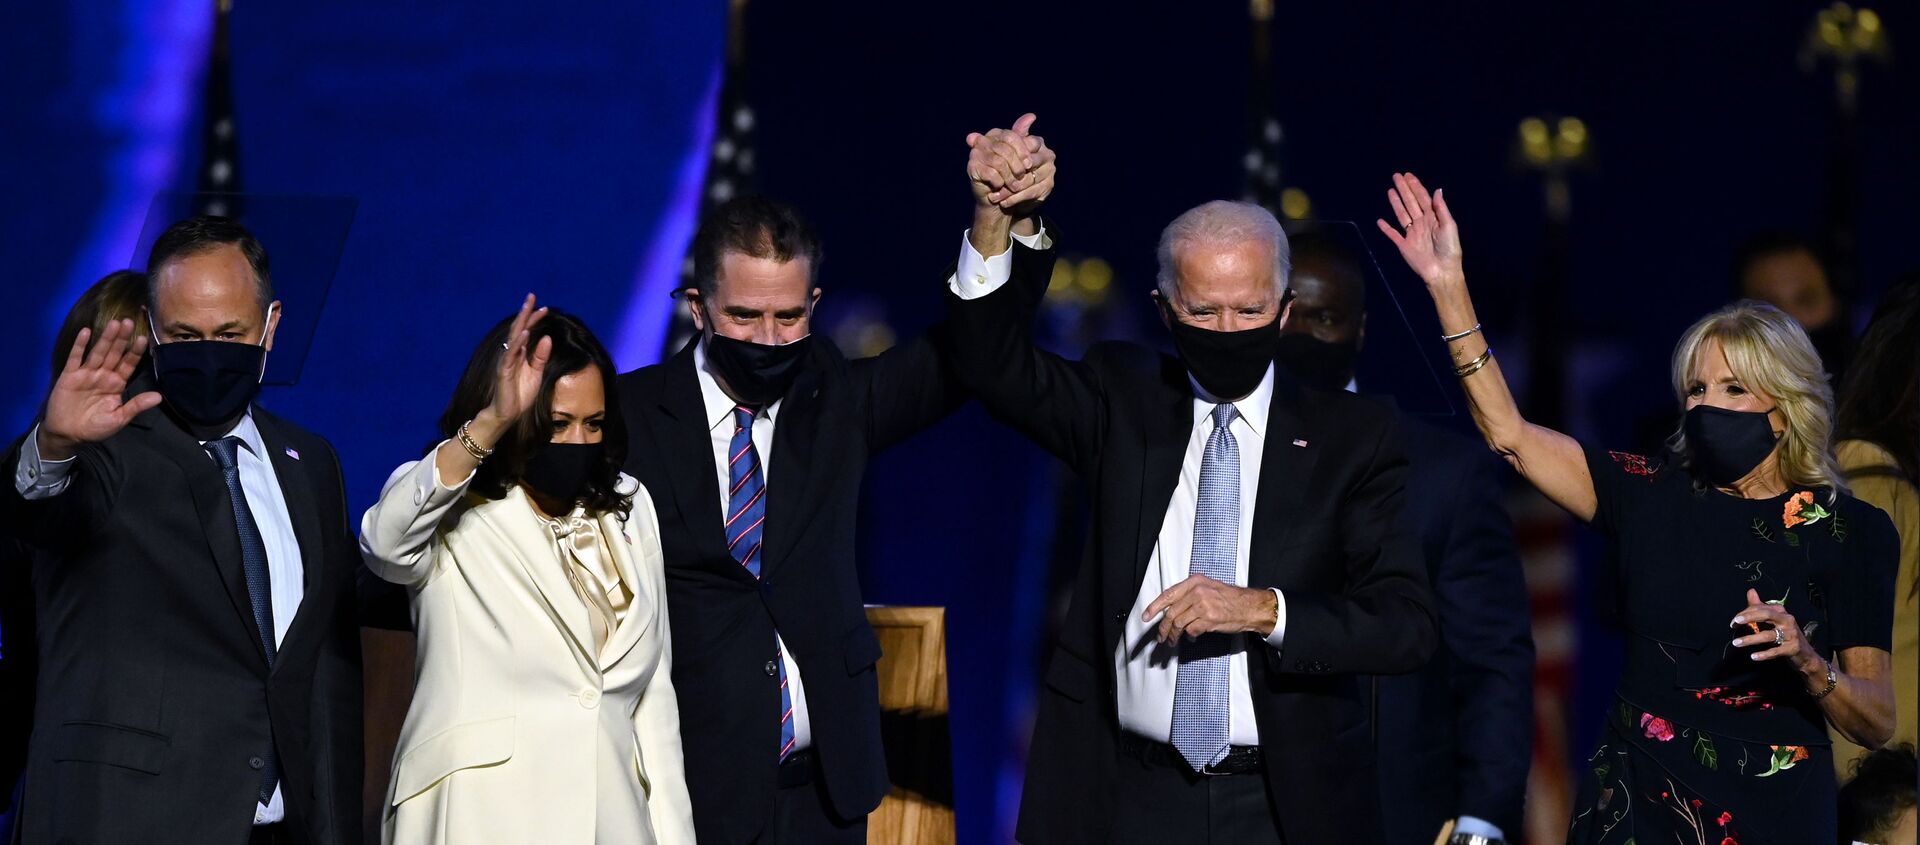 (From L) Husband of Vice President-elect Kamala Harris, Douglas Emhoff, Vice President-elect Kamala Harris, Hunter Biden, US President-elect Joe Biden and wife Jill Biden salute the crowd after delivering remarks in Wilmington, Delaware, on November 7, 2020, after being declared the winners of the presidential election. (Photo by Jim WATSON / AFP) - Sputnik International, 1920, 19.01.2021